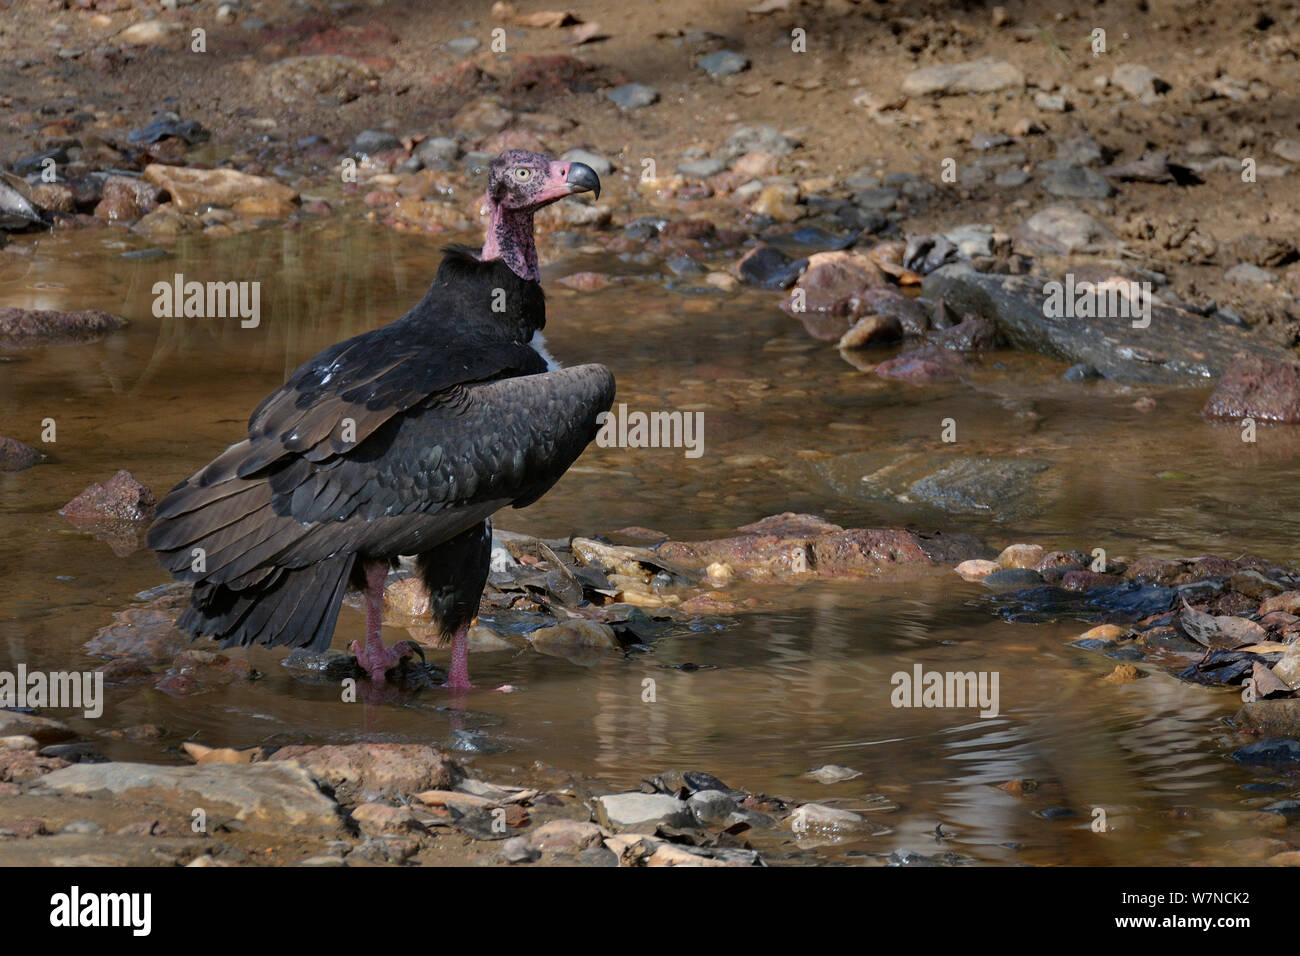 Red headed / Asian king vulture (Sarcogyps calvus) in the river, Kanha National Park, Madhya Pradesh, India, March Stock Photo